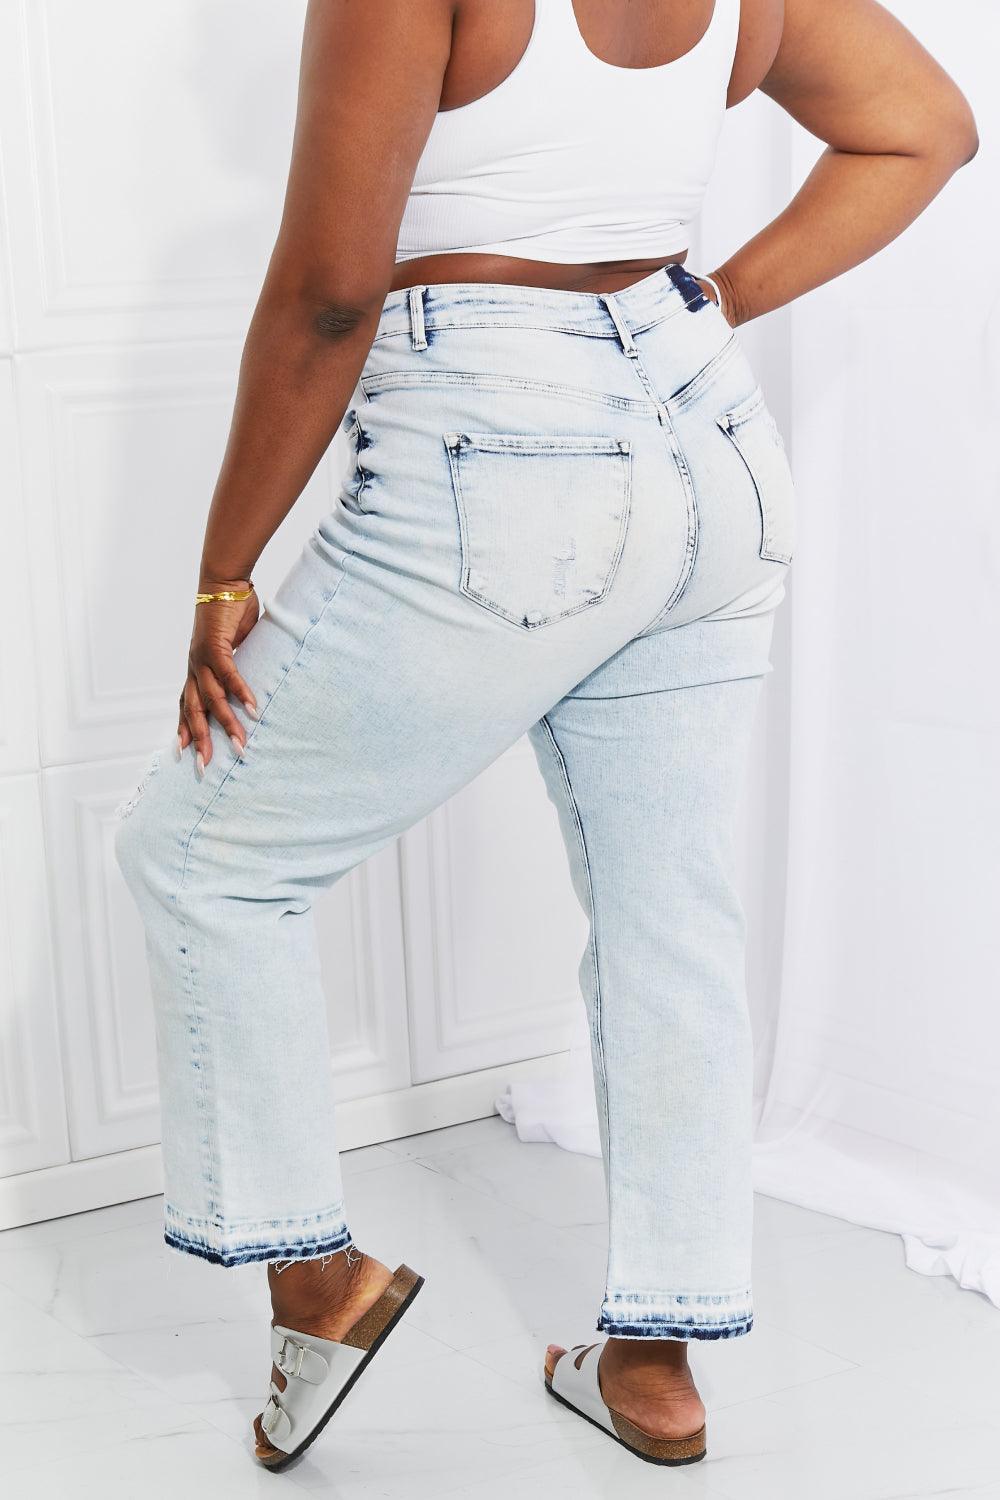 Chubby Chick Light Wash Plus Size Cropped Jeans - MXSTUDIO.COM